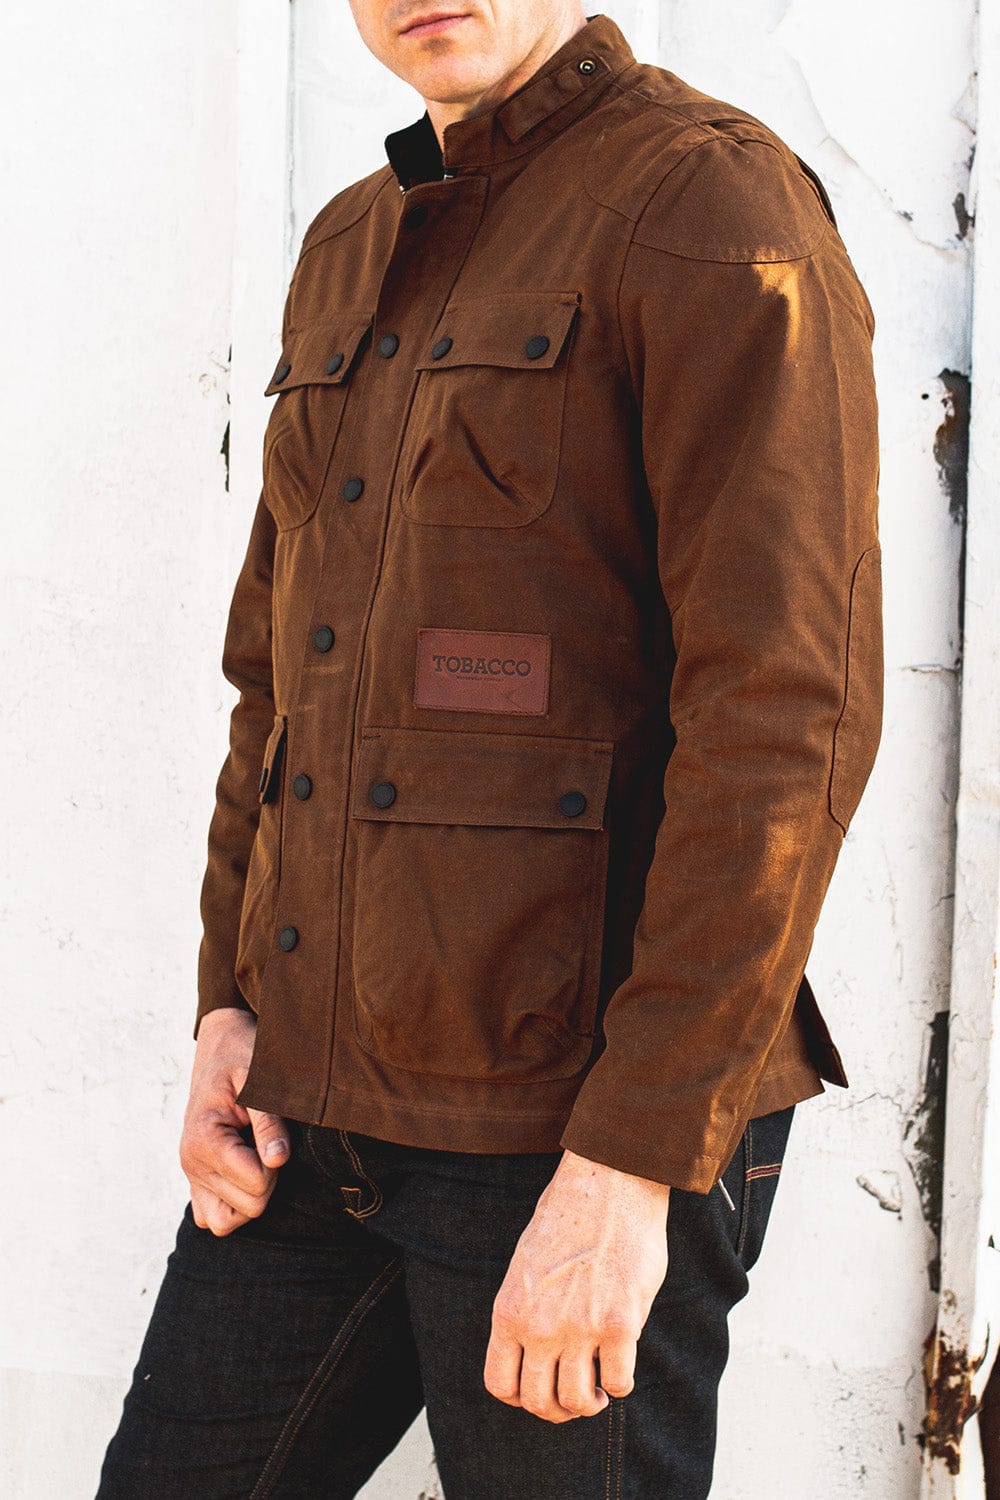 The Canvas Brown. Motorwear Back, - Waxed McCoy Armor Protective Pockets for Tobacco Shoulder Jacket Elbow - and D3O®